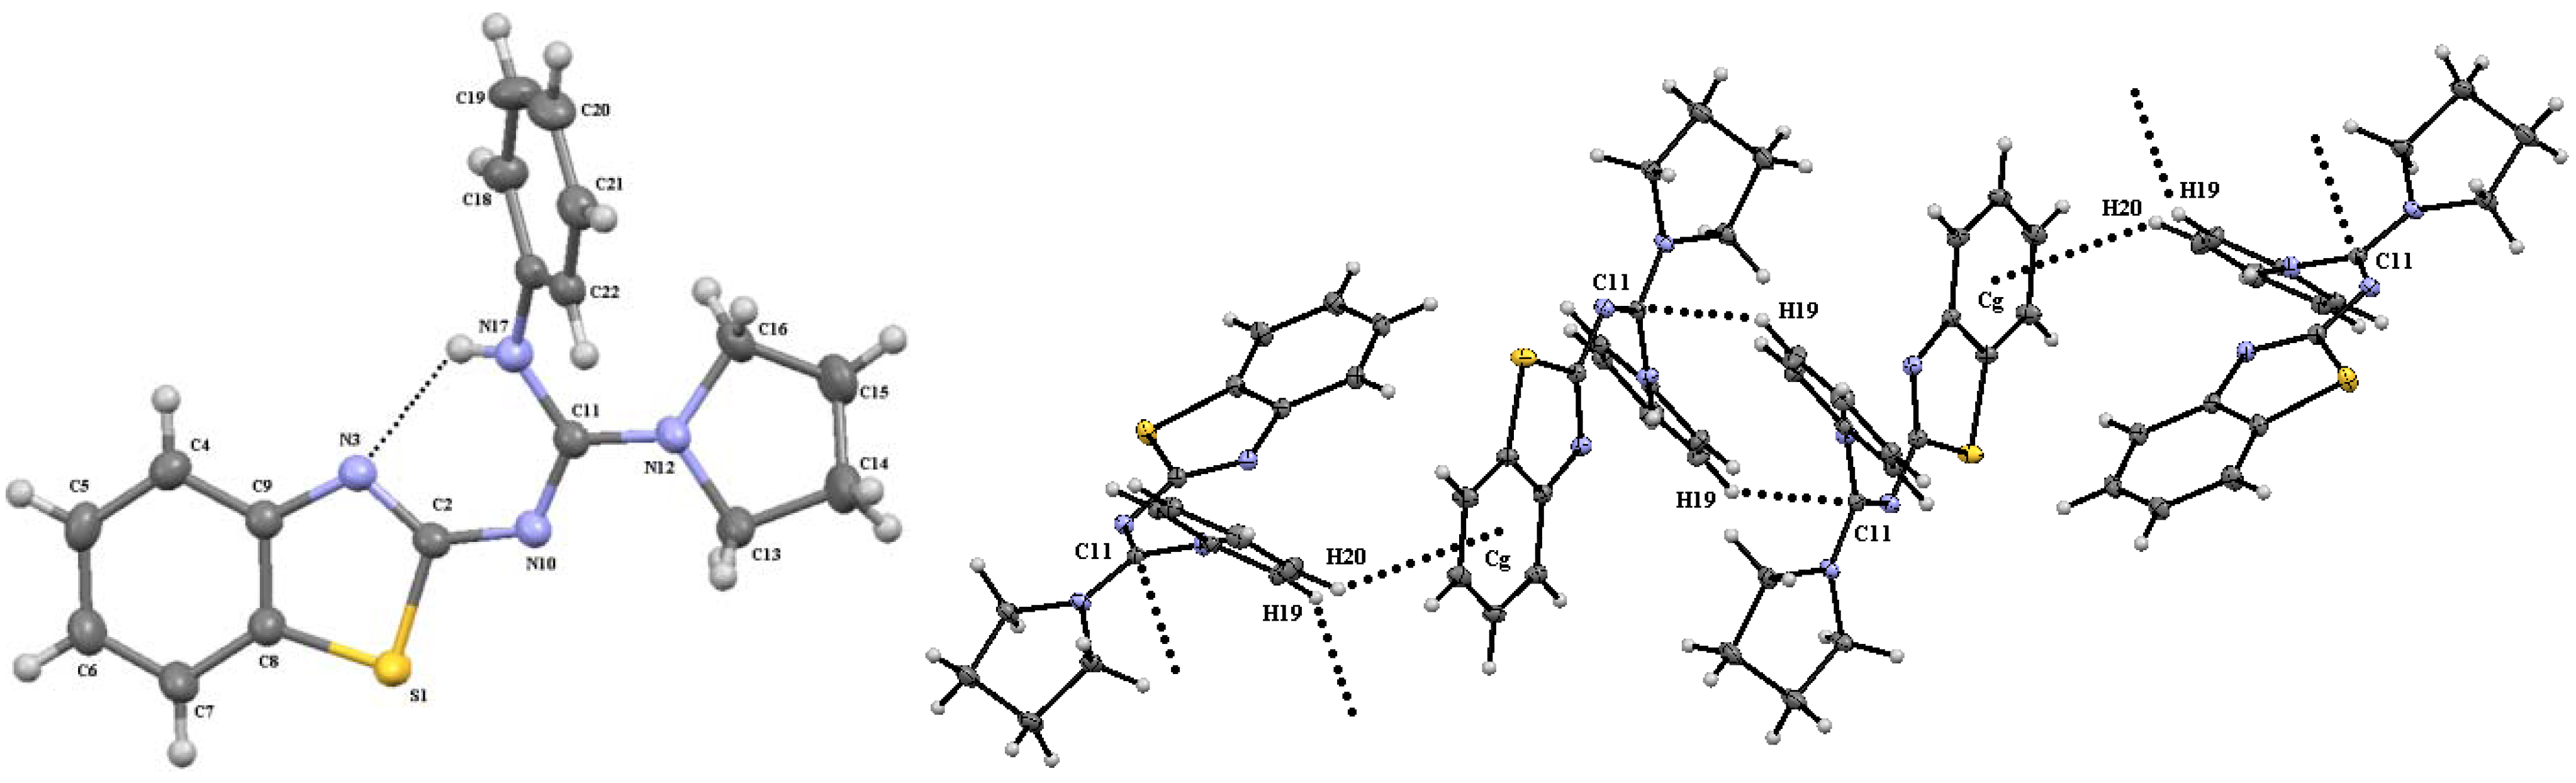 Molecules Free Full Text A Synthetic Method To Access Symmetric And Non Symmetric 2 N N Disubstituted Guanidinebenzothiazoles Html